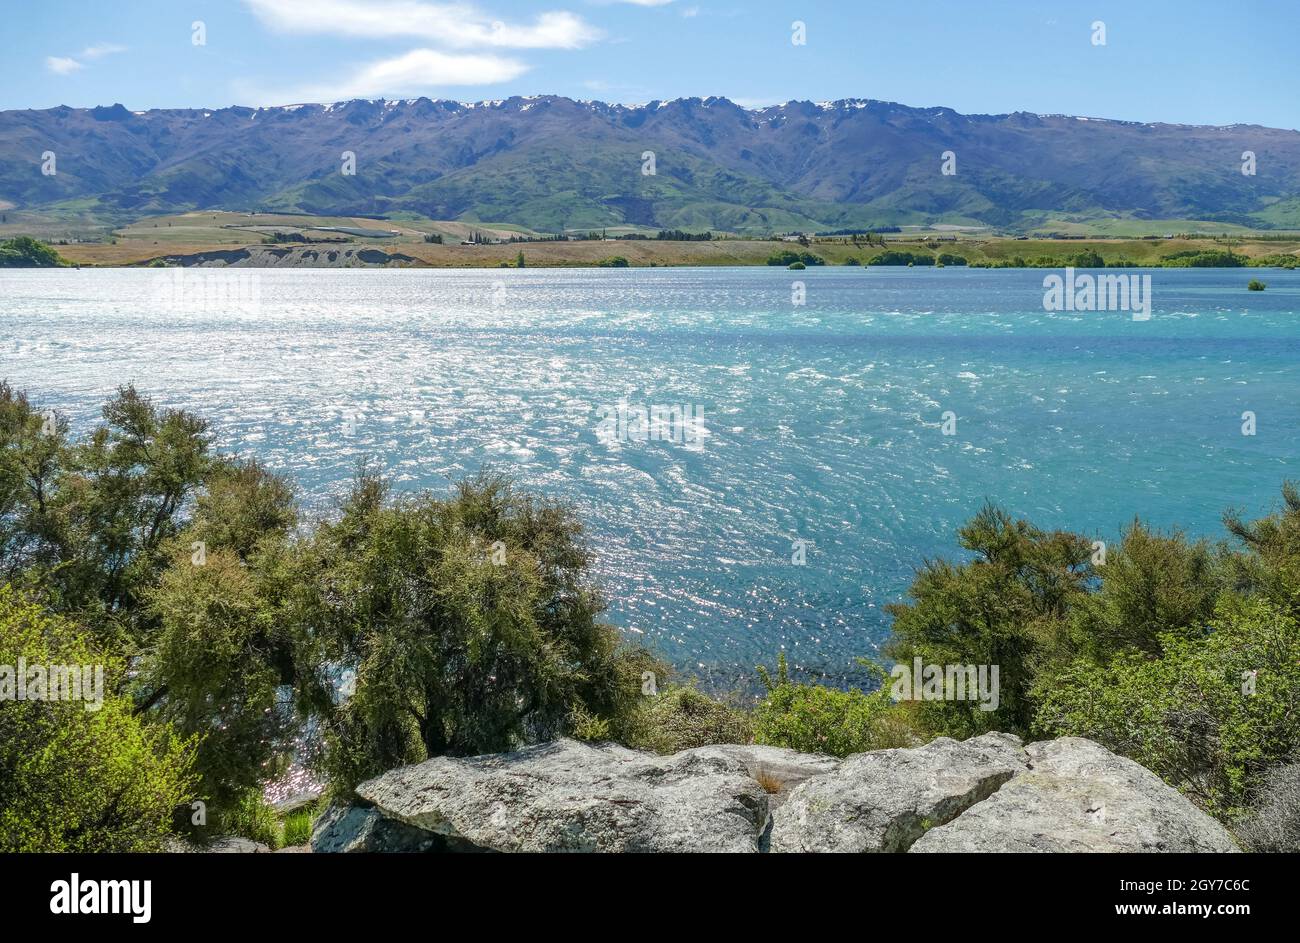 Sunny scenery at Clutha River at the South Island of New Zealand Stock Photo